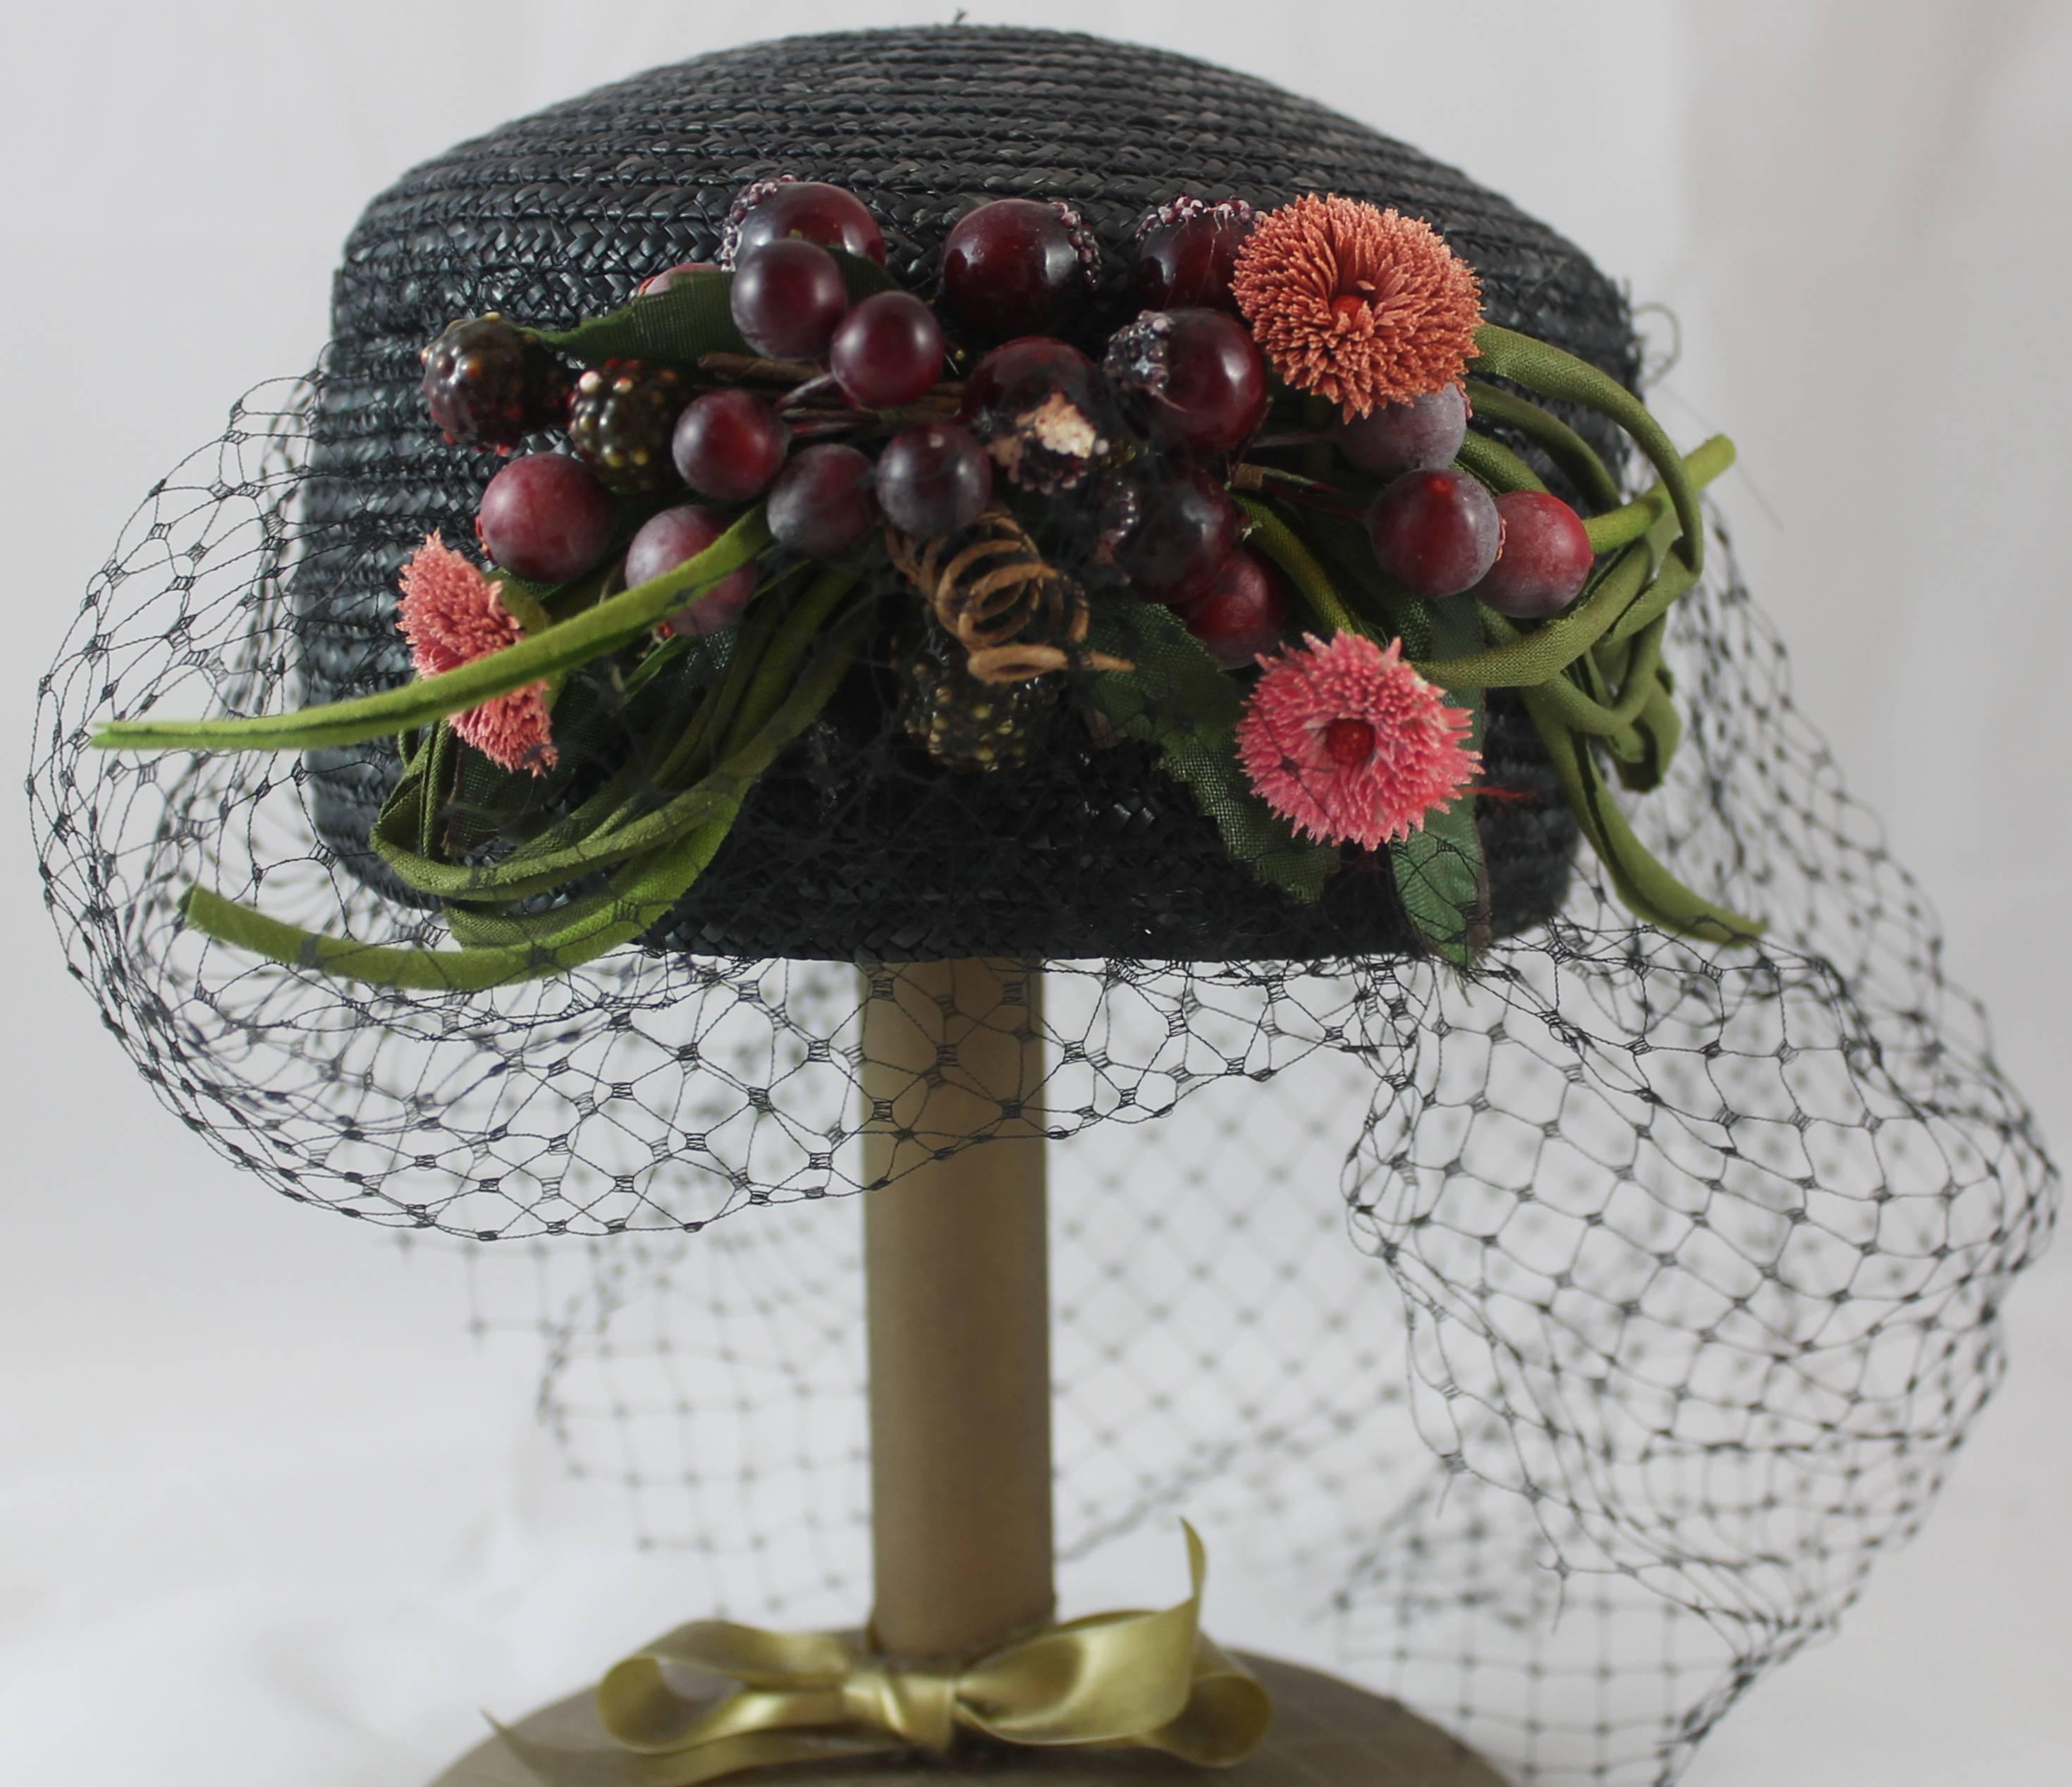 Vintage Black Straw Hat with Net and Plastic Fruit. This straw pill box hat has hanging black mesh and plastic fruit clustered in the front. It is in very good condition with a couple ares on the mesh that are ripped.

Measurements
Circumference: